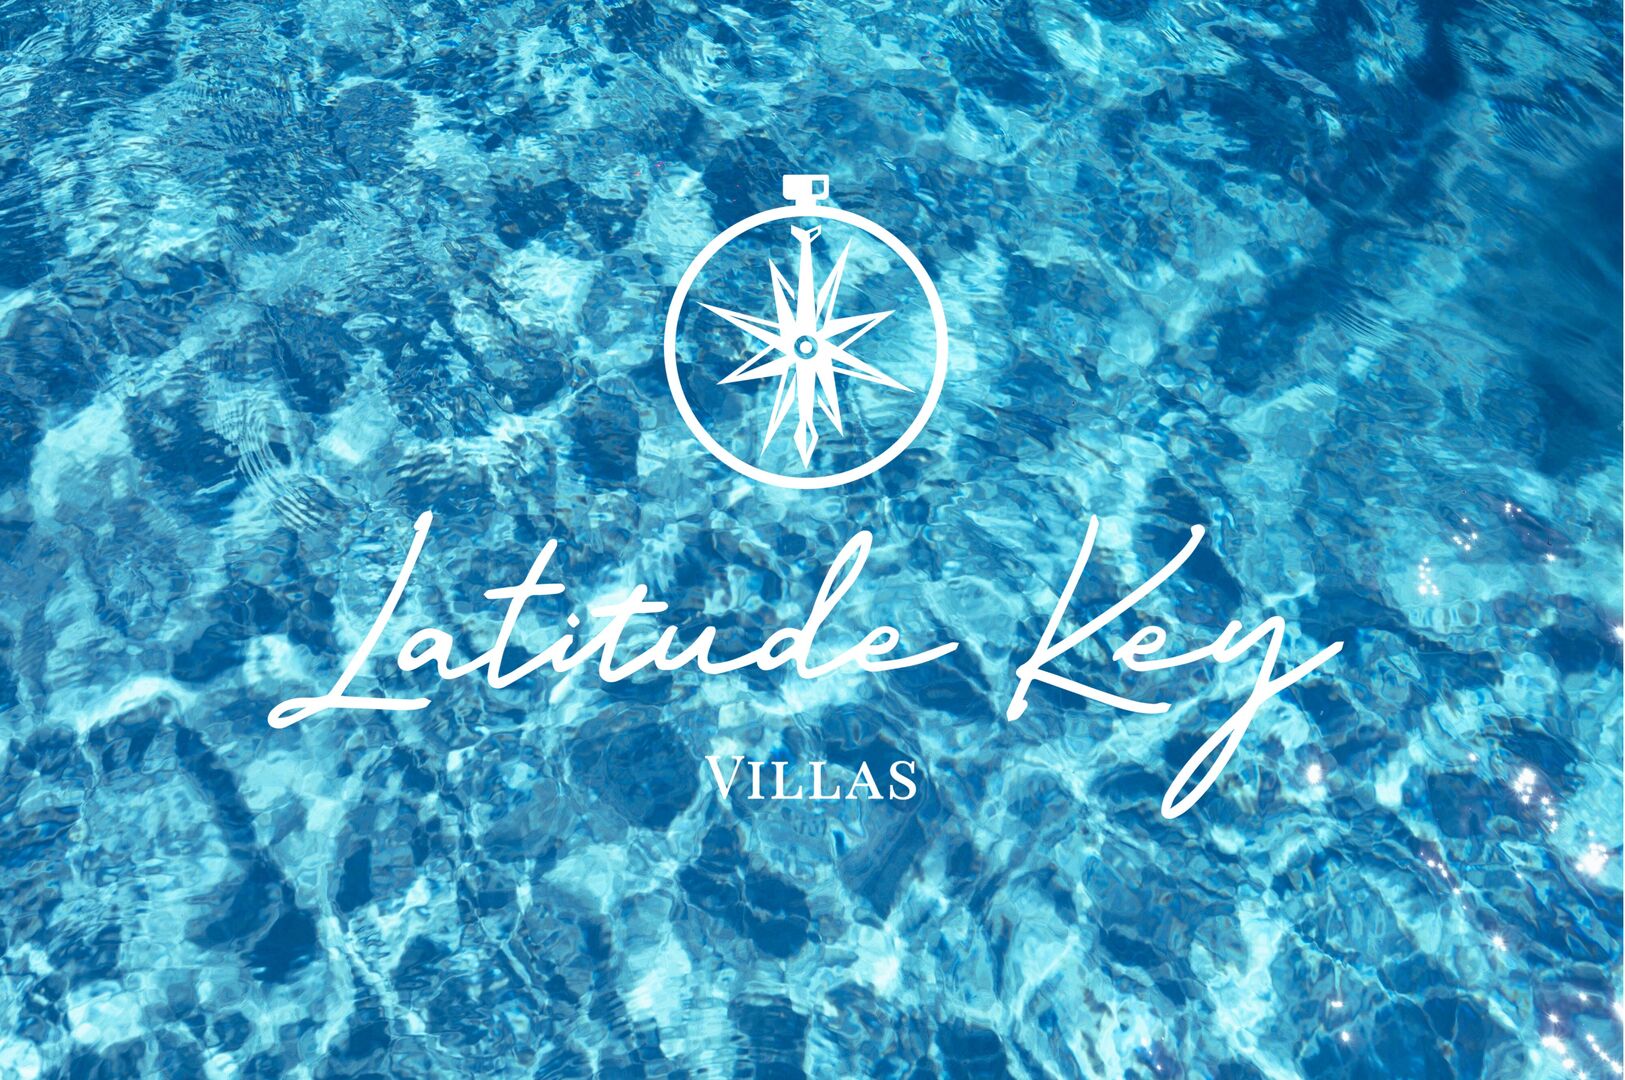 Ocean View Key is part of the Villas Collection. Enjoy a stress free vacation with Latitude Key - Curated Vacation Properties.